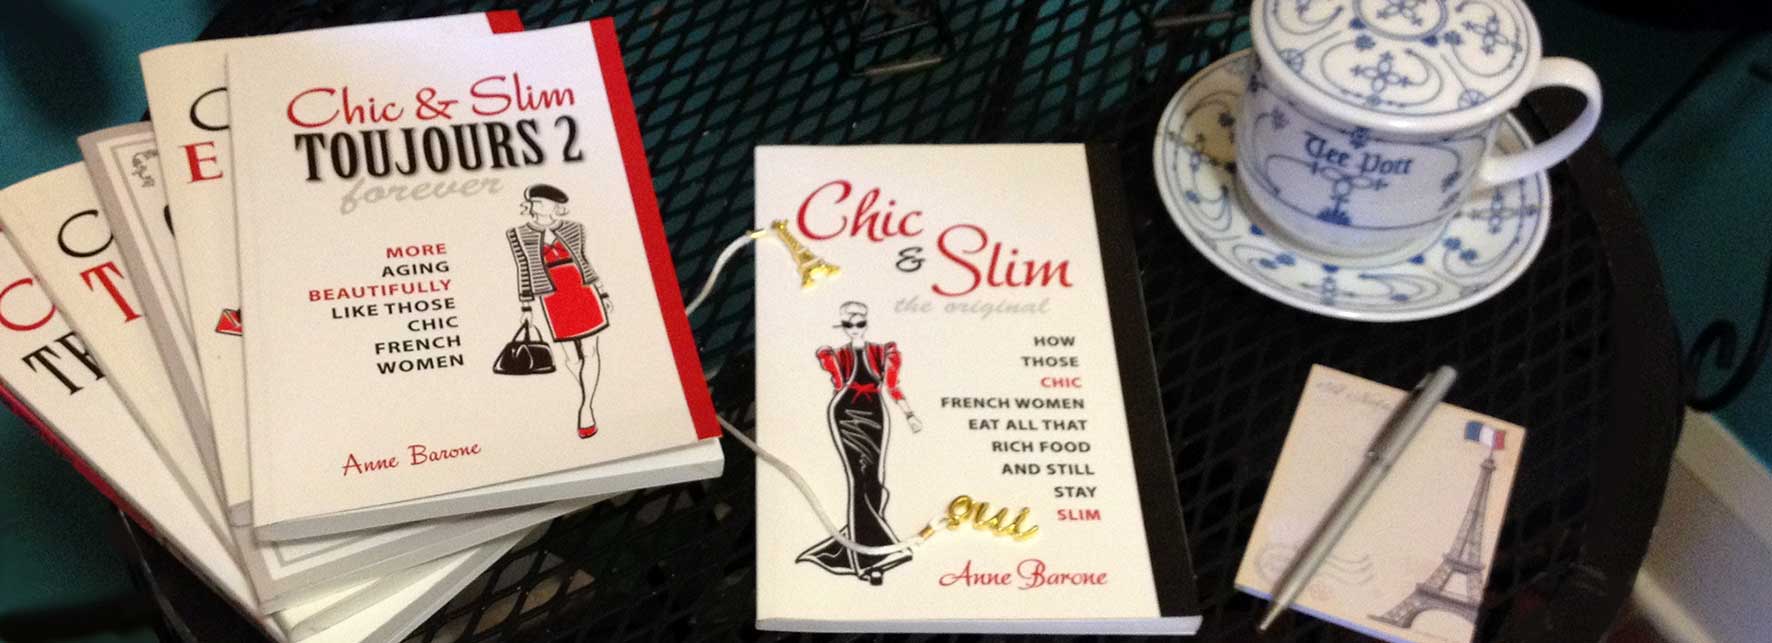 Chic & Slim books with cup of tea and notepad and pen